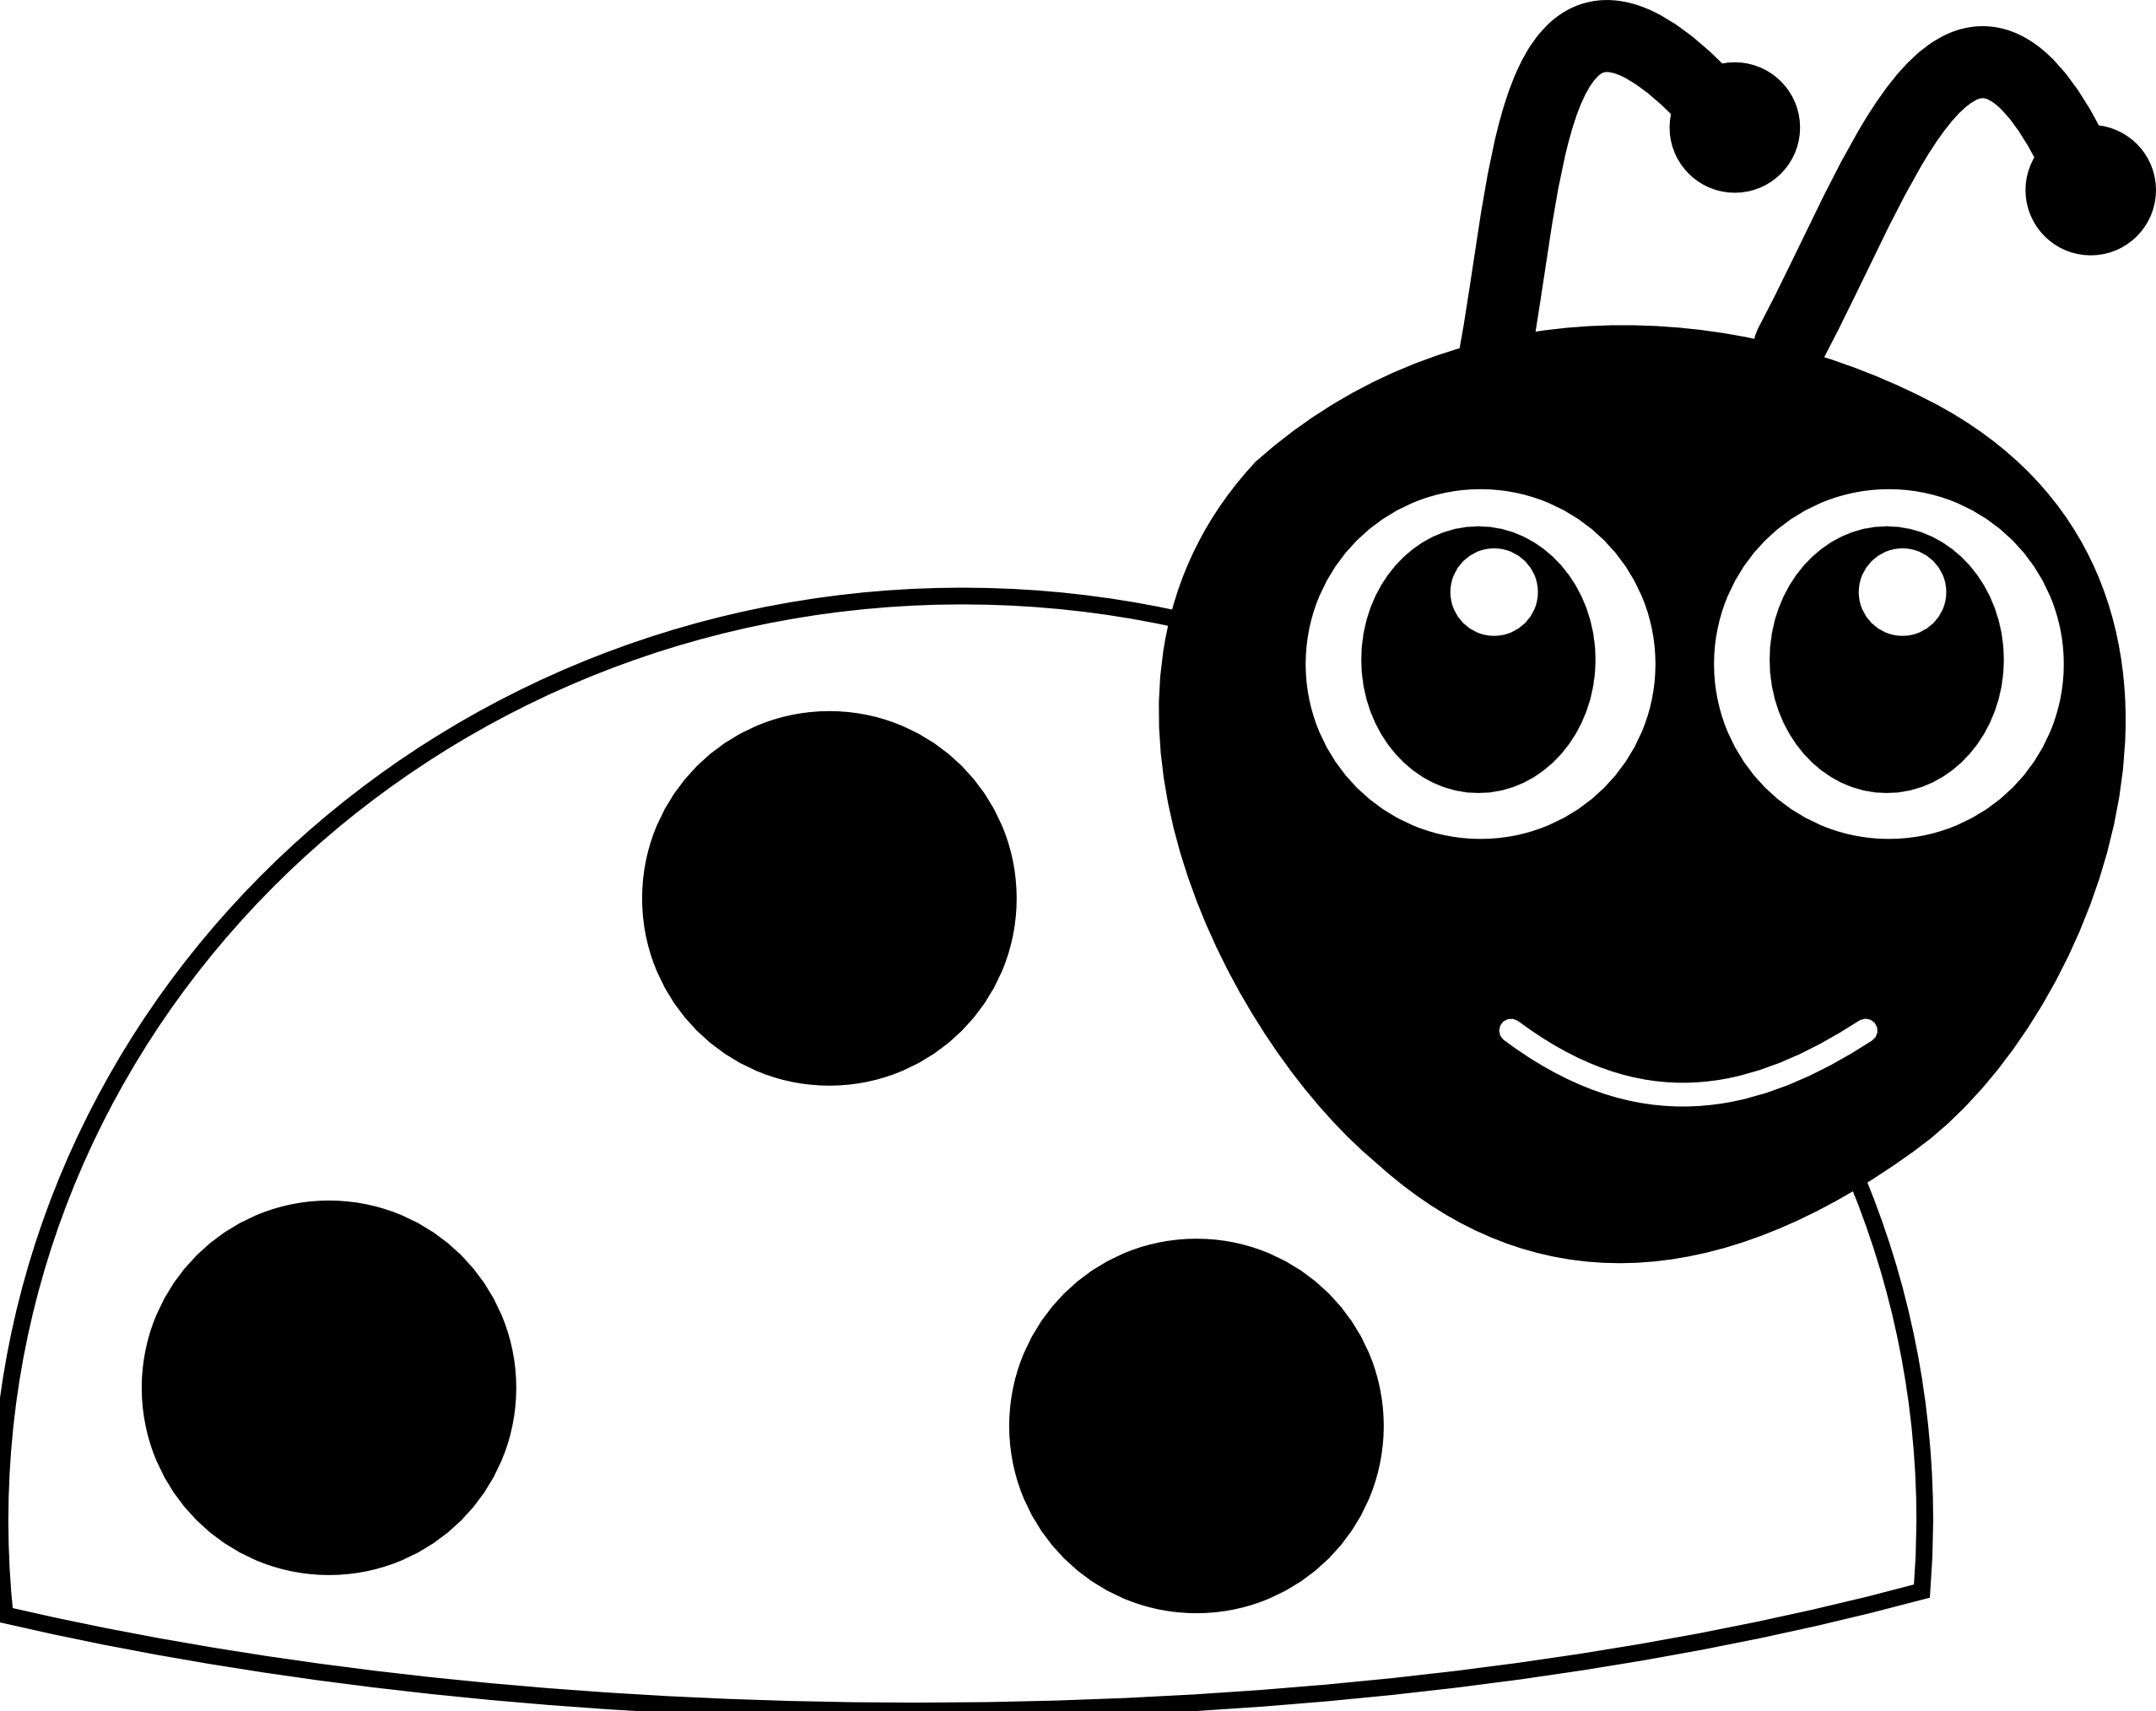 Insect clipart outline. Black and white panda